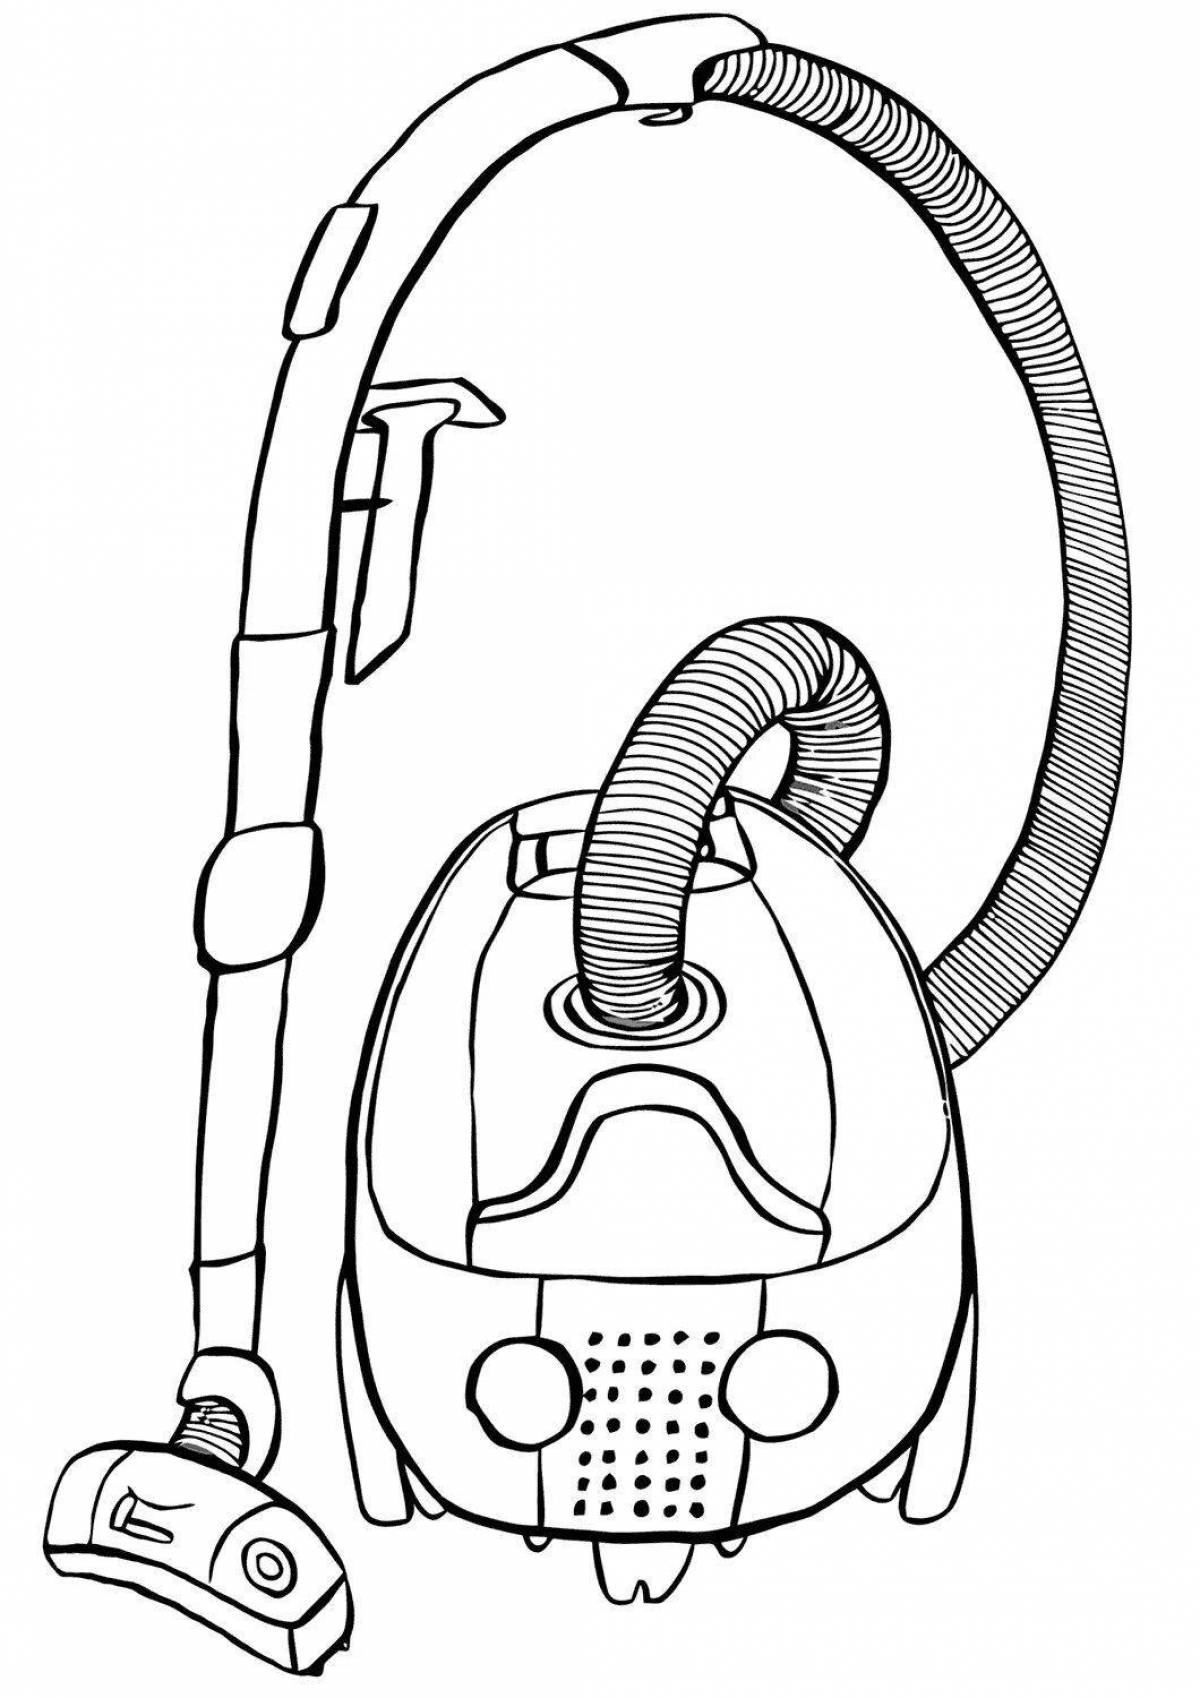 Coloring page adorable electrical devices